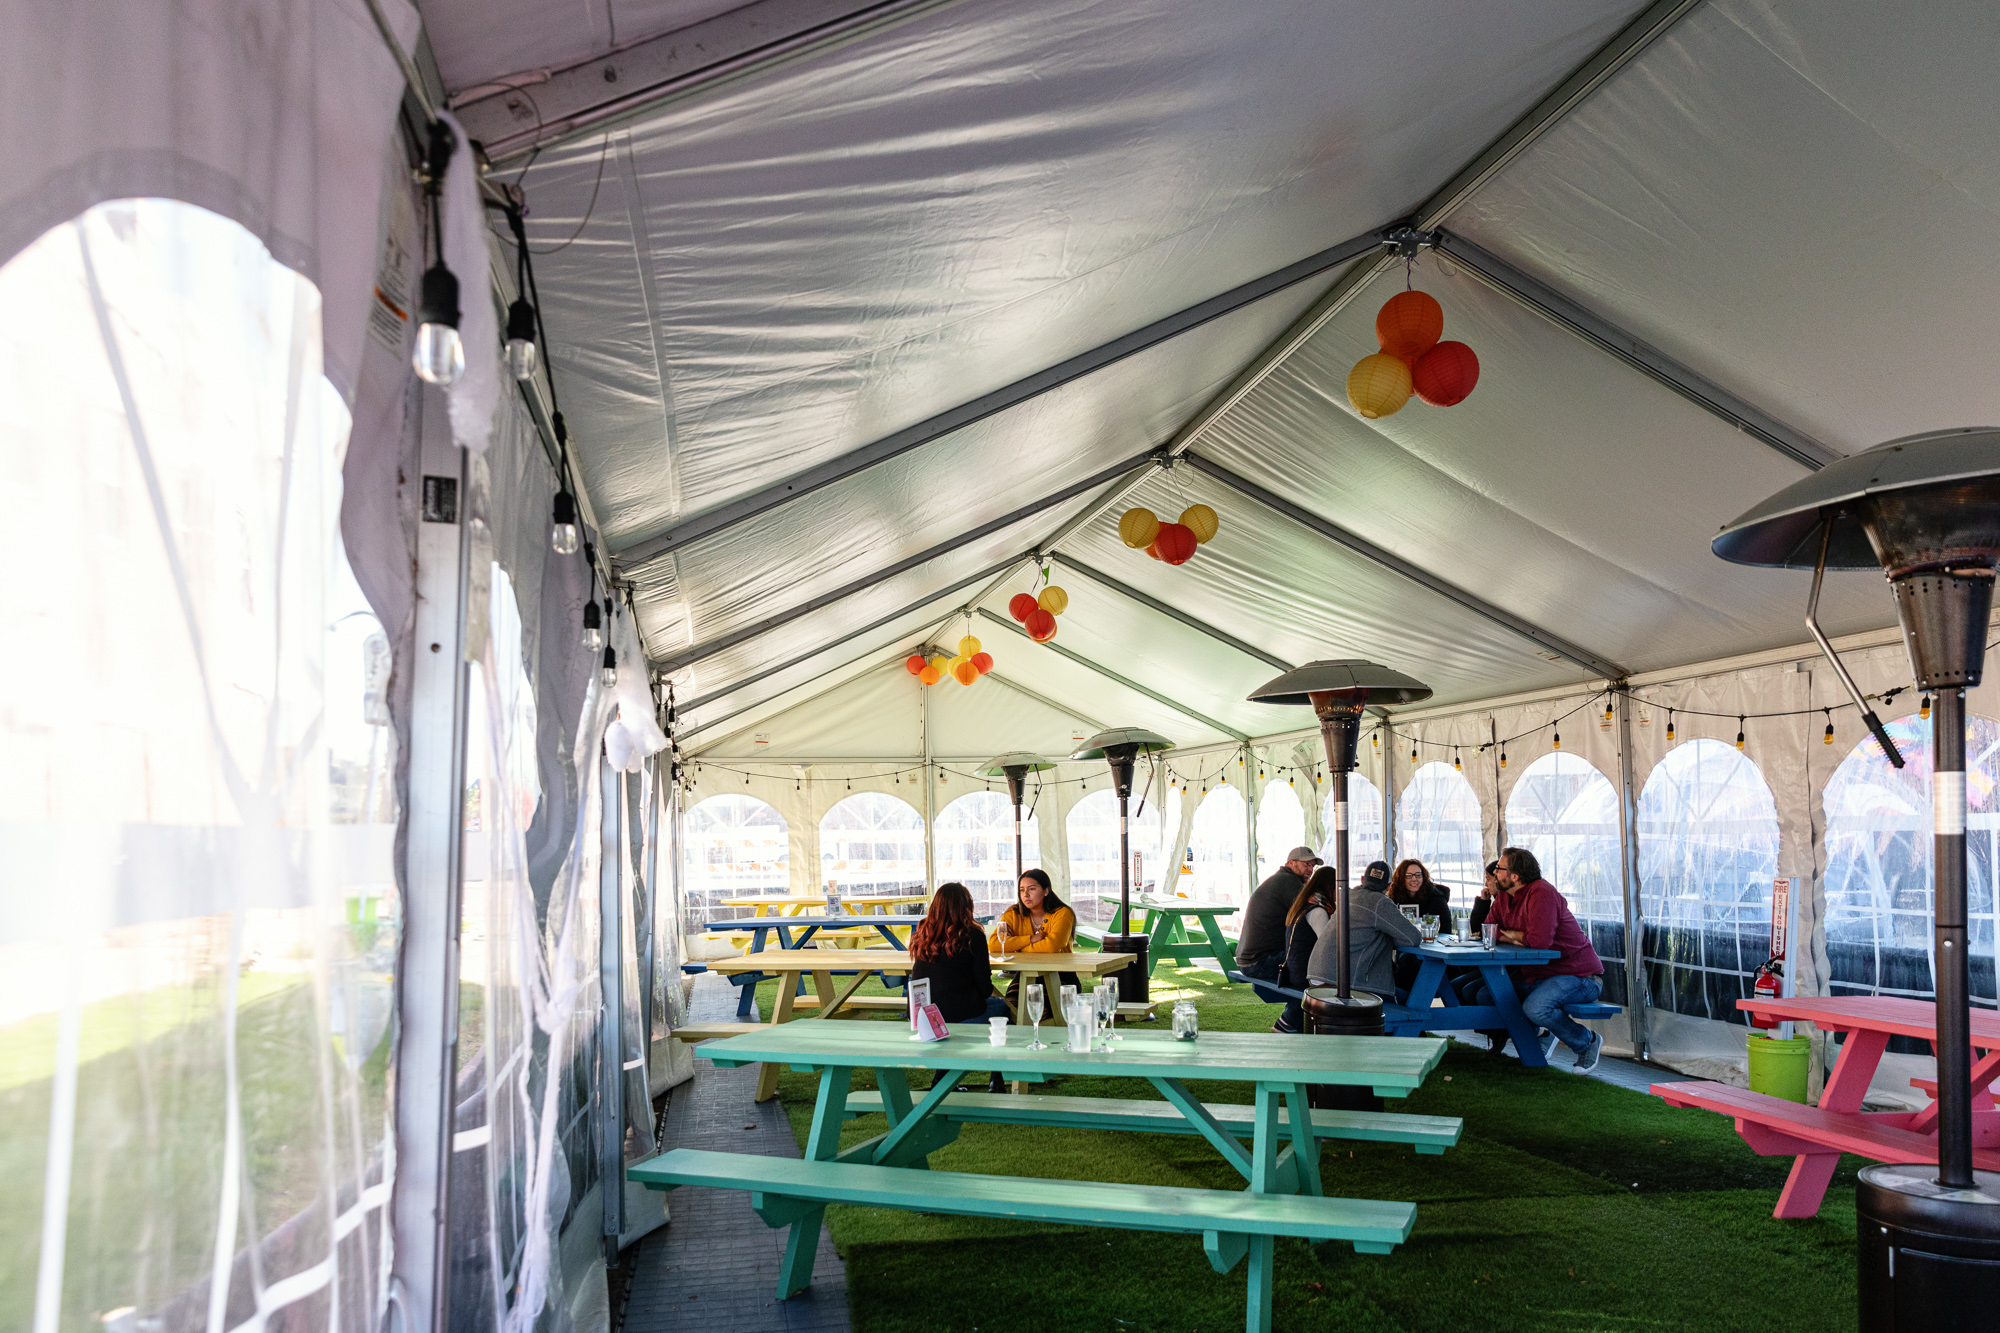 A heated indoor tent at Bobcat Bonnie’s is filled with colorful picnic tables.